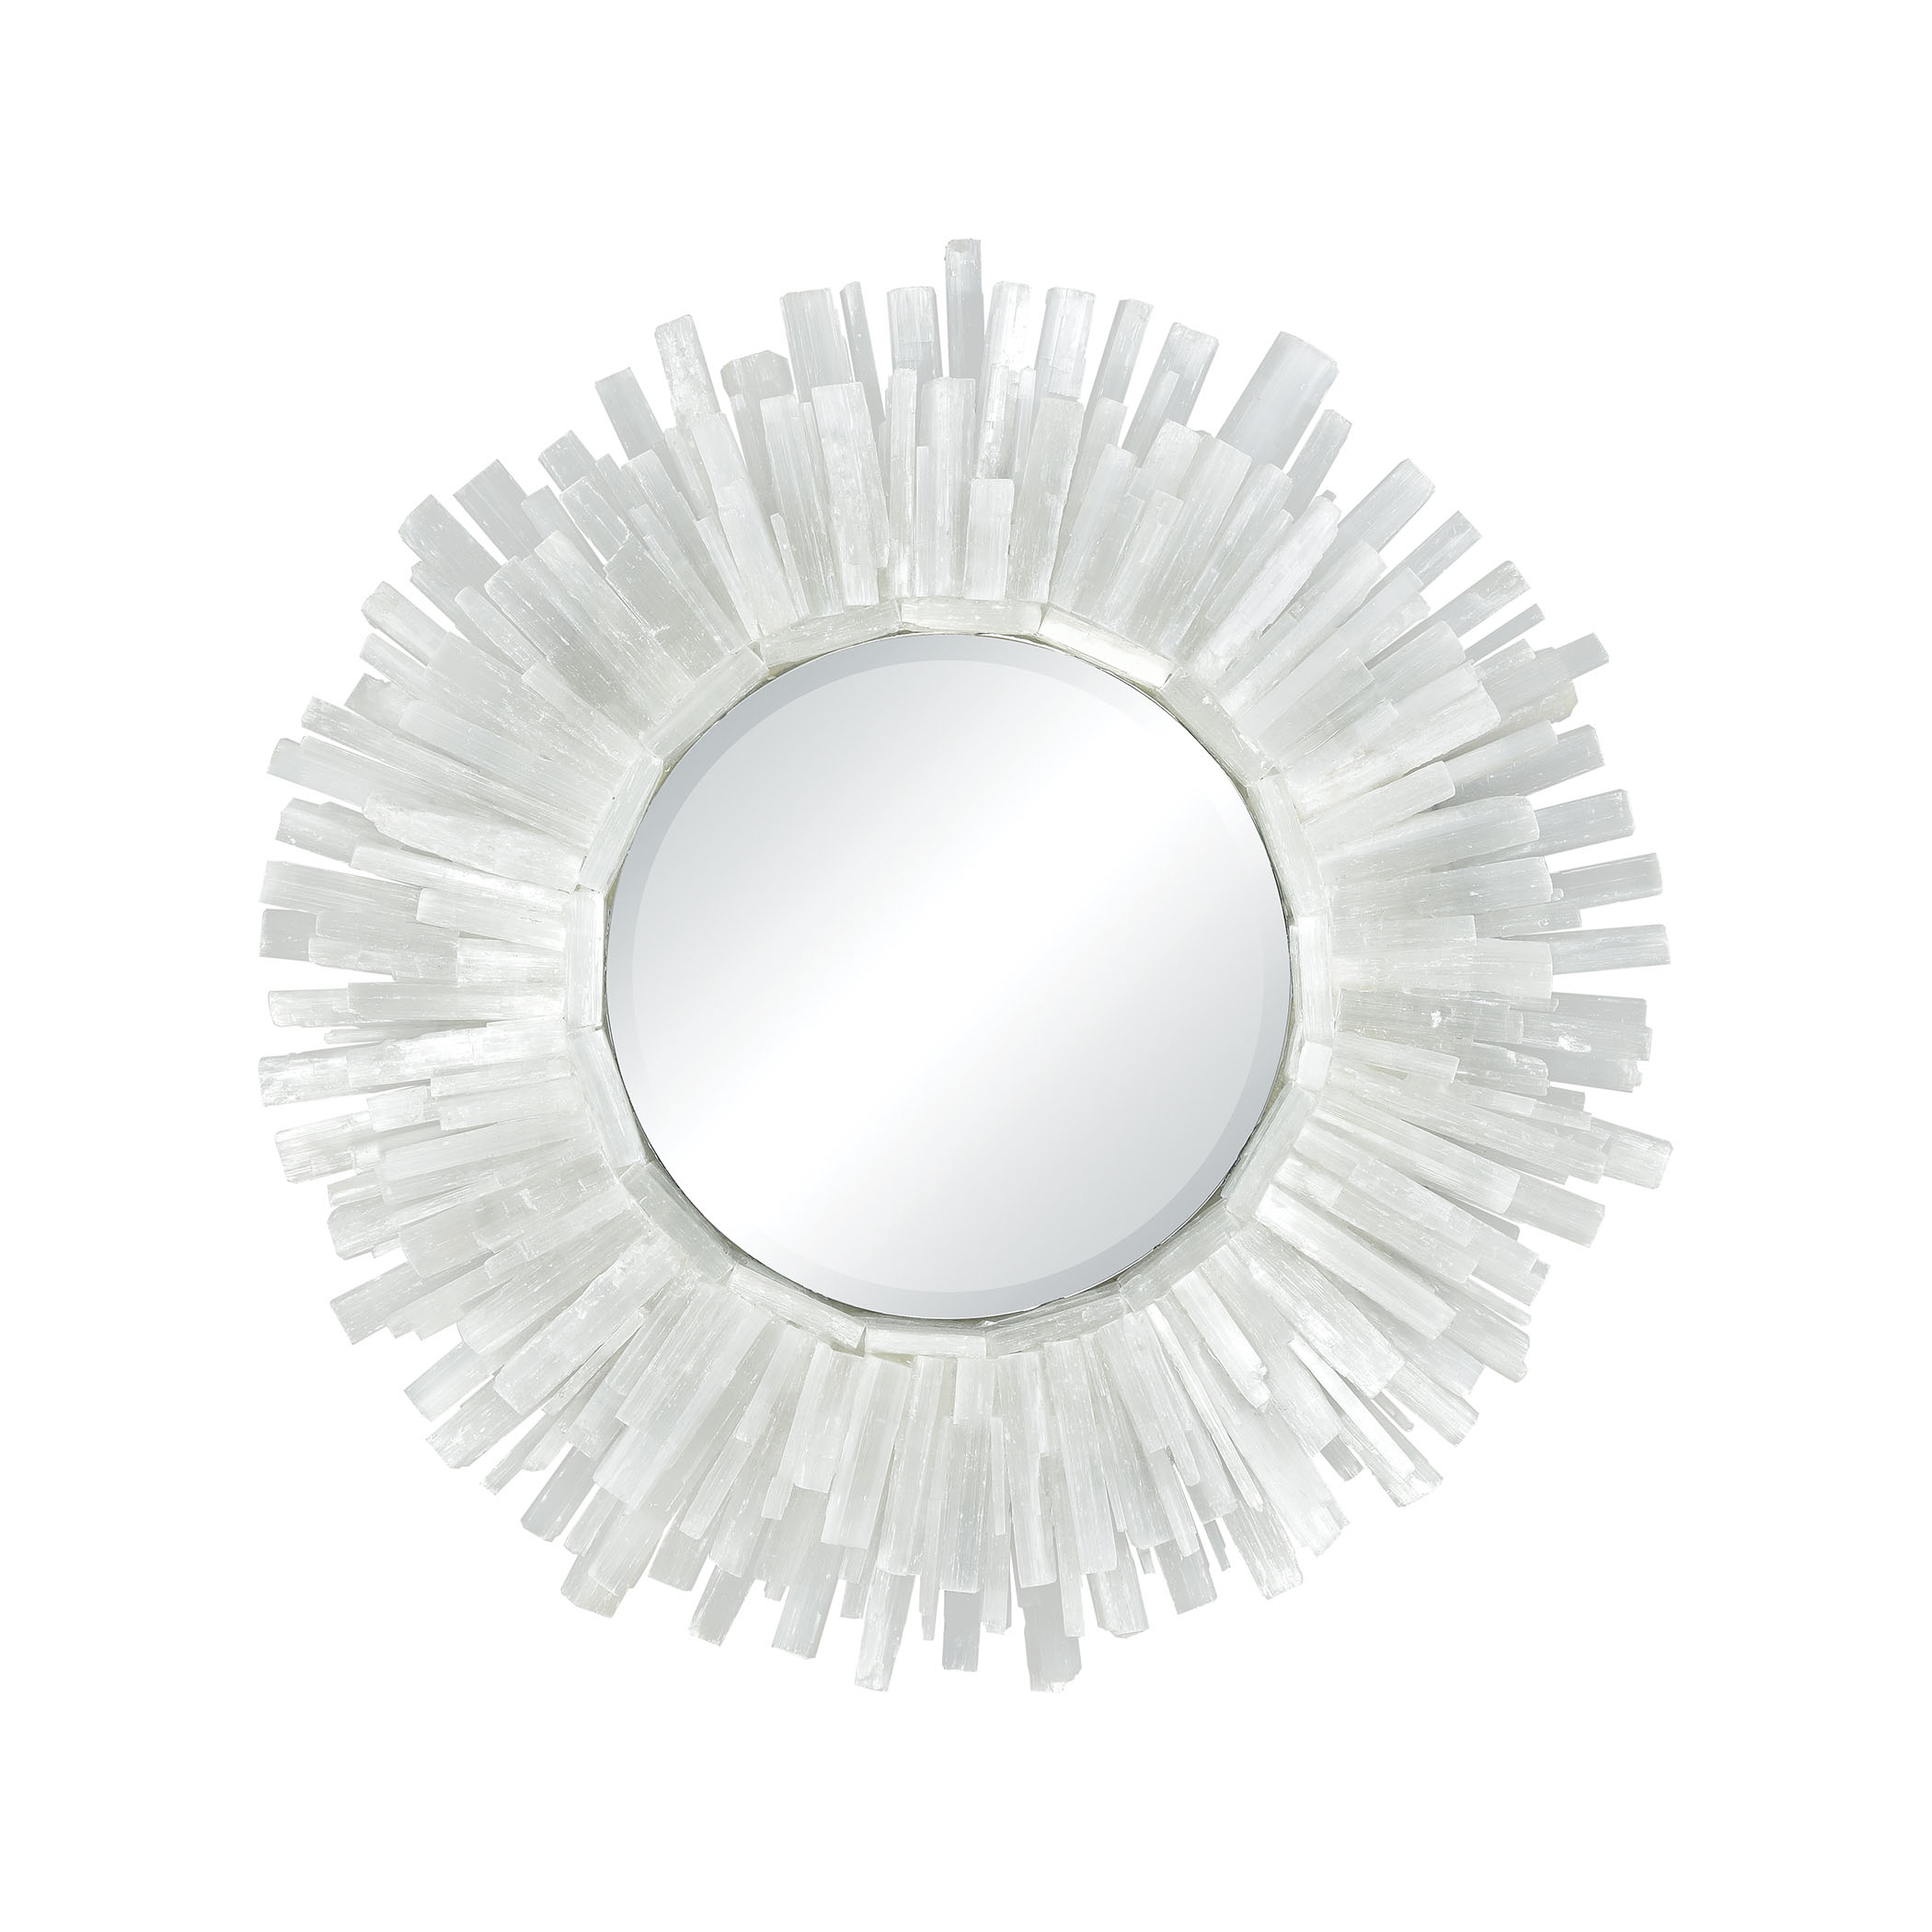 Mirror with crystals along the edges from Dimond Home